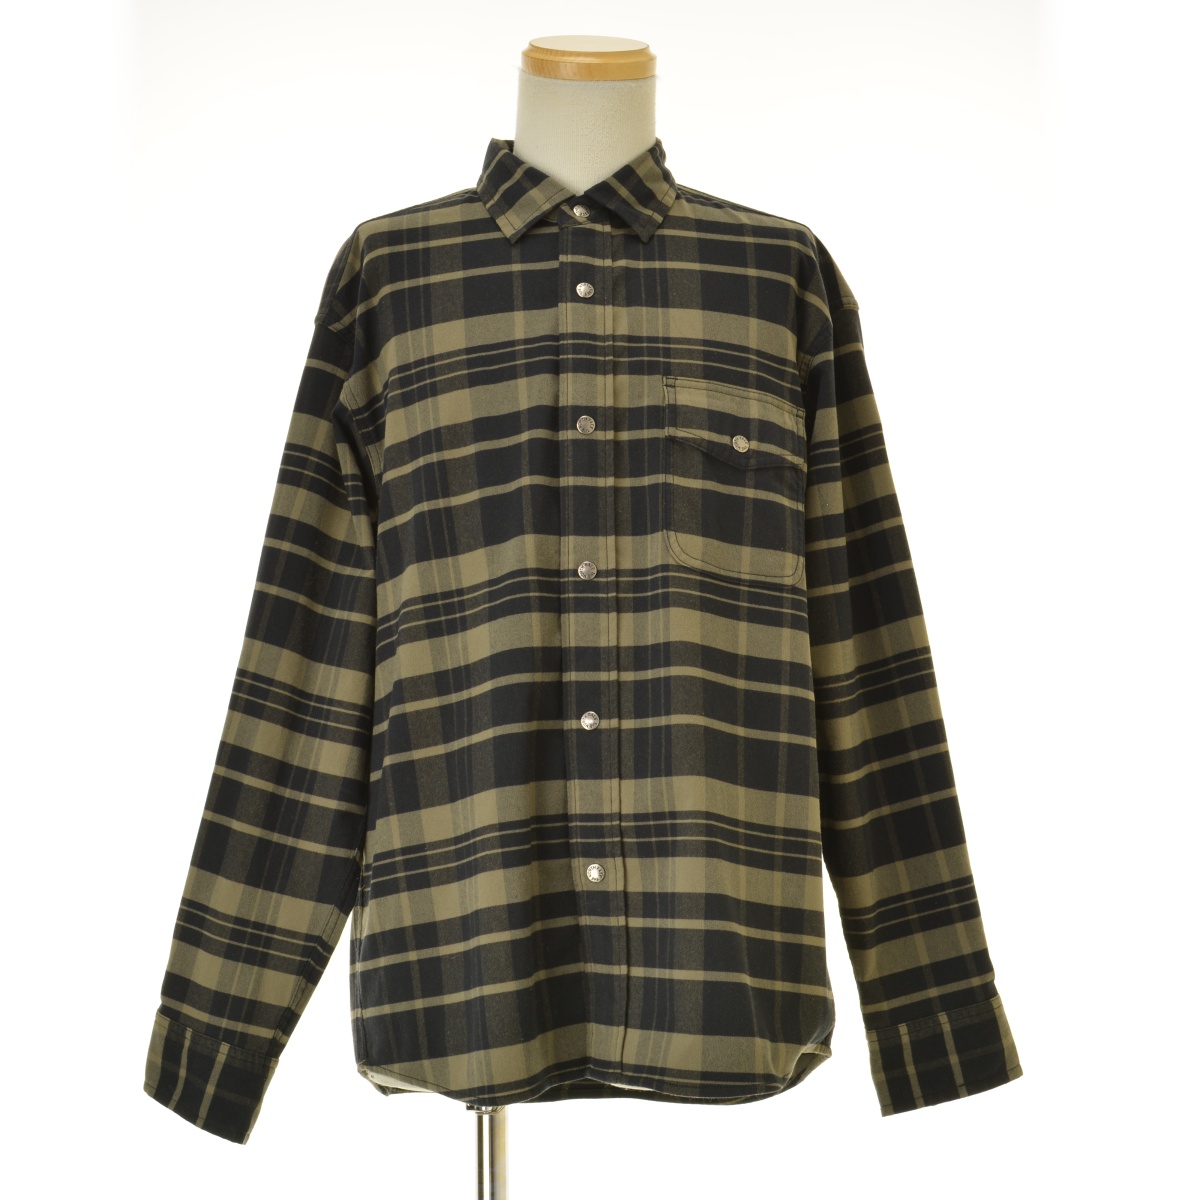 THE NORTH FACE / ΡեθNR62031 L/S STRETCH FLANNEL SHIRT 󥰥꡼֥ȥåեͥ륷 HTĹµġרܺٲ